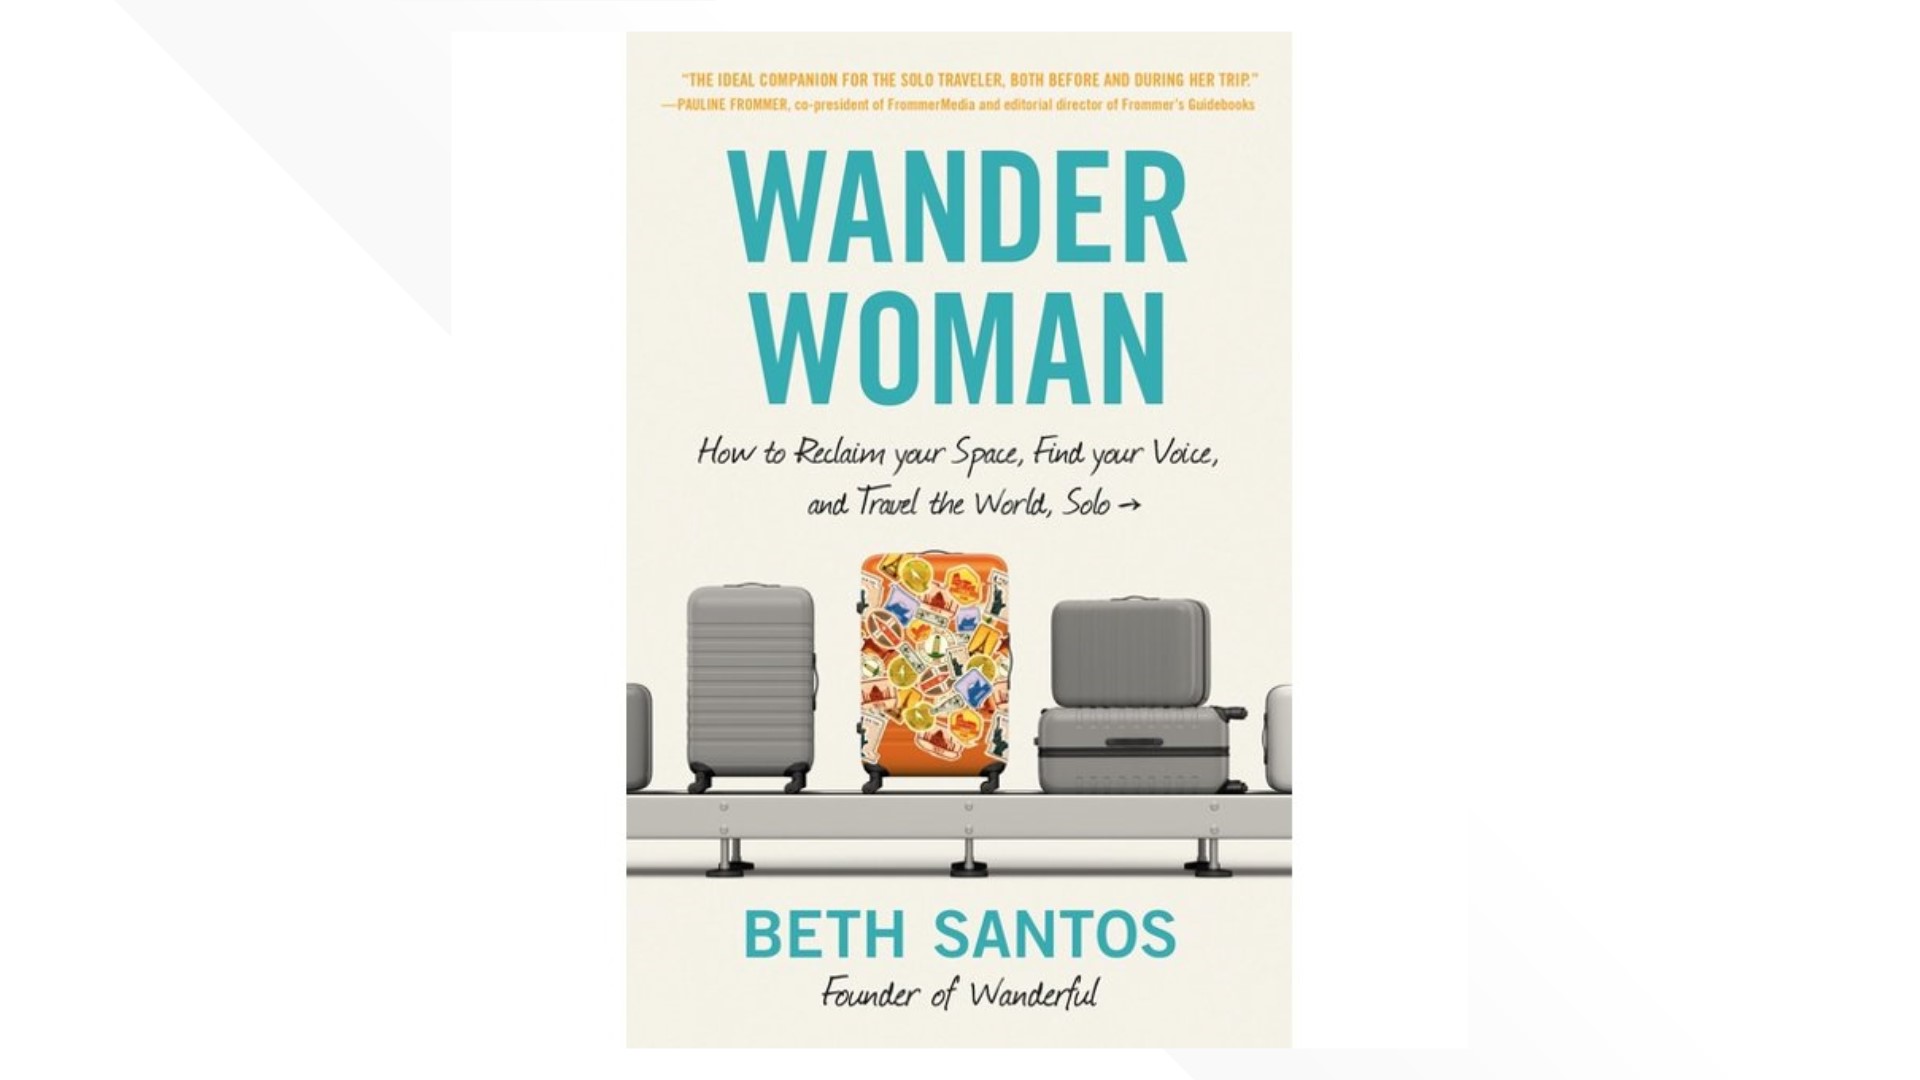 Author and travel enthusiast Beth Santos told us about her new book 'Wander Woman' which is meant to inspire women to get out and travel solo!